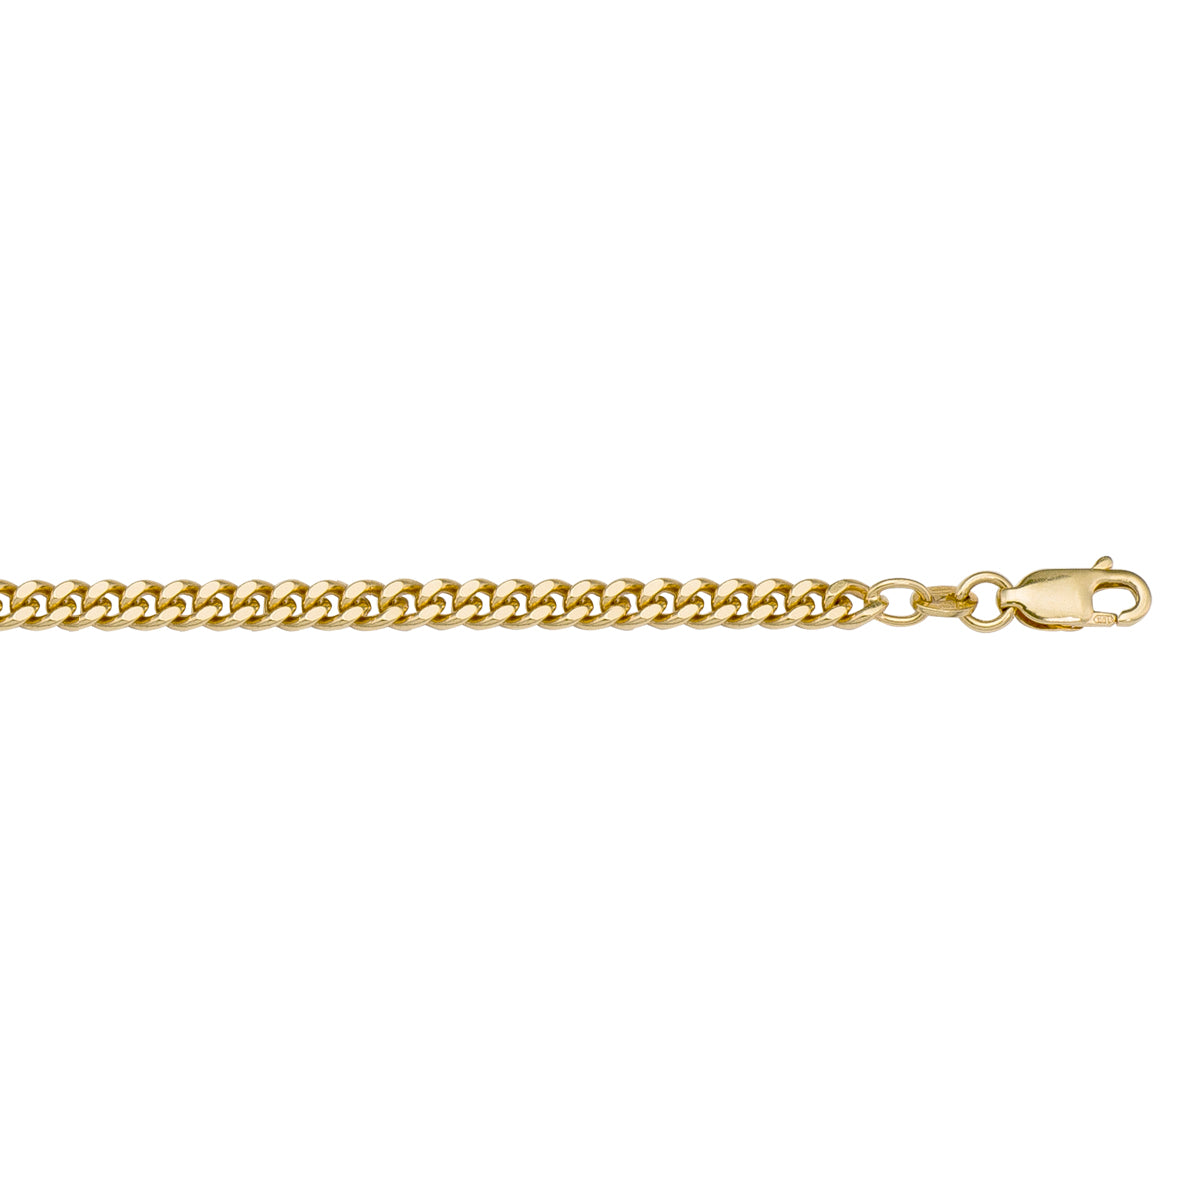 CHAINS YELLOW GOLD SOLID CURB LINK 